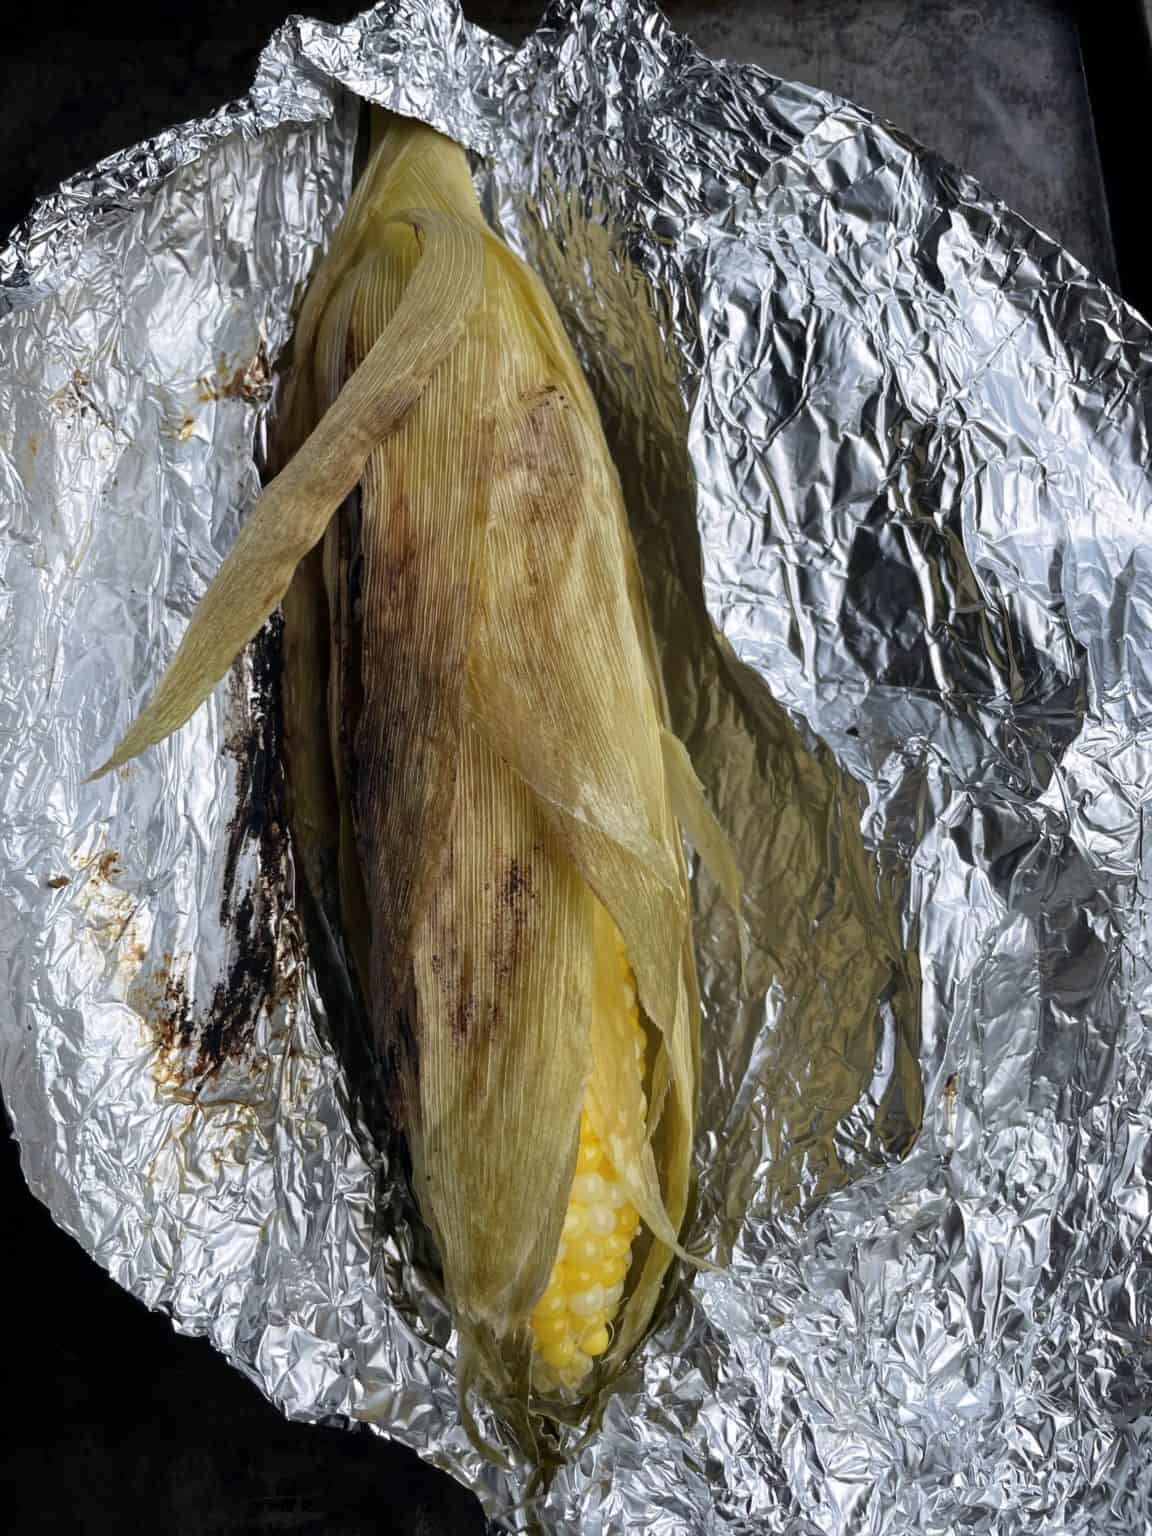 Blackstone Grilled Corn On The Cob In Foil - From Michigan To The Table How To Grill Corn On Blackstone